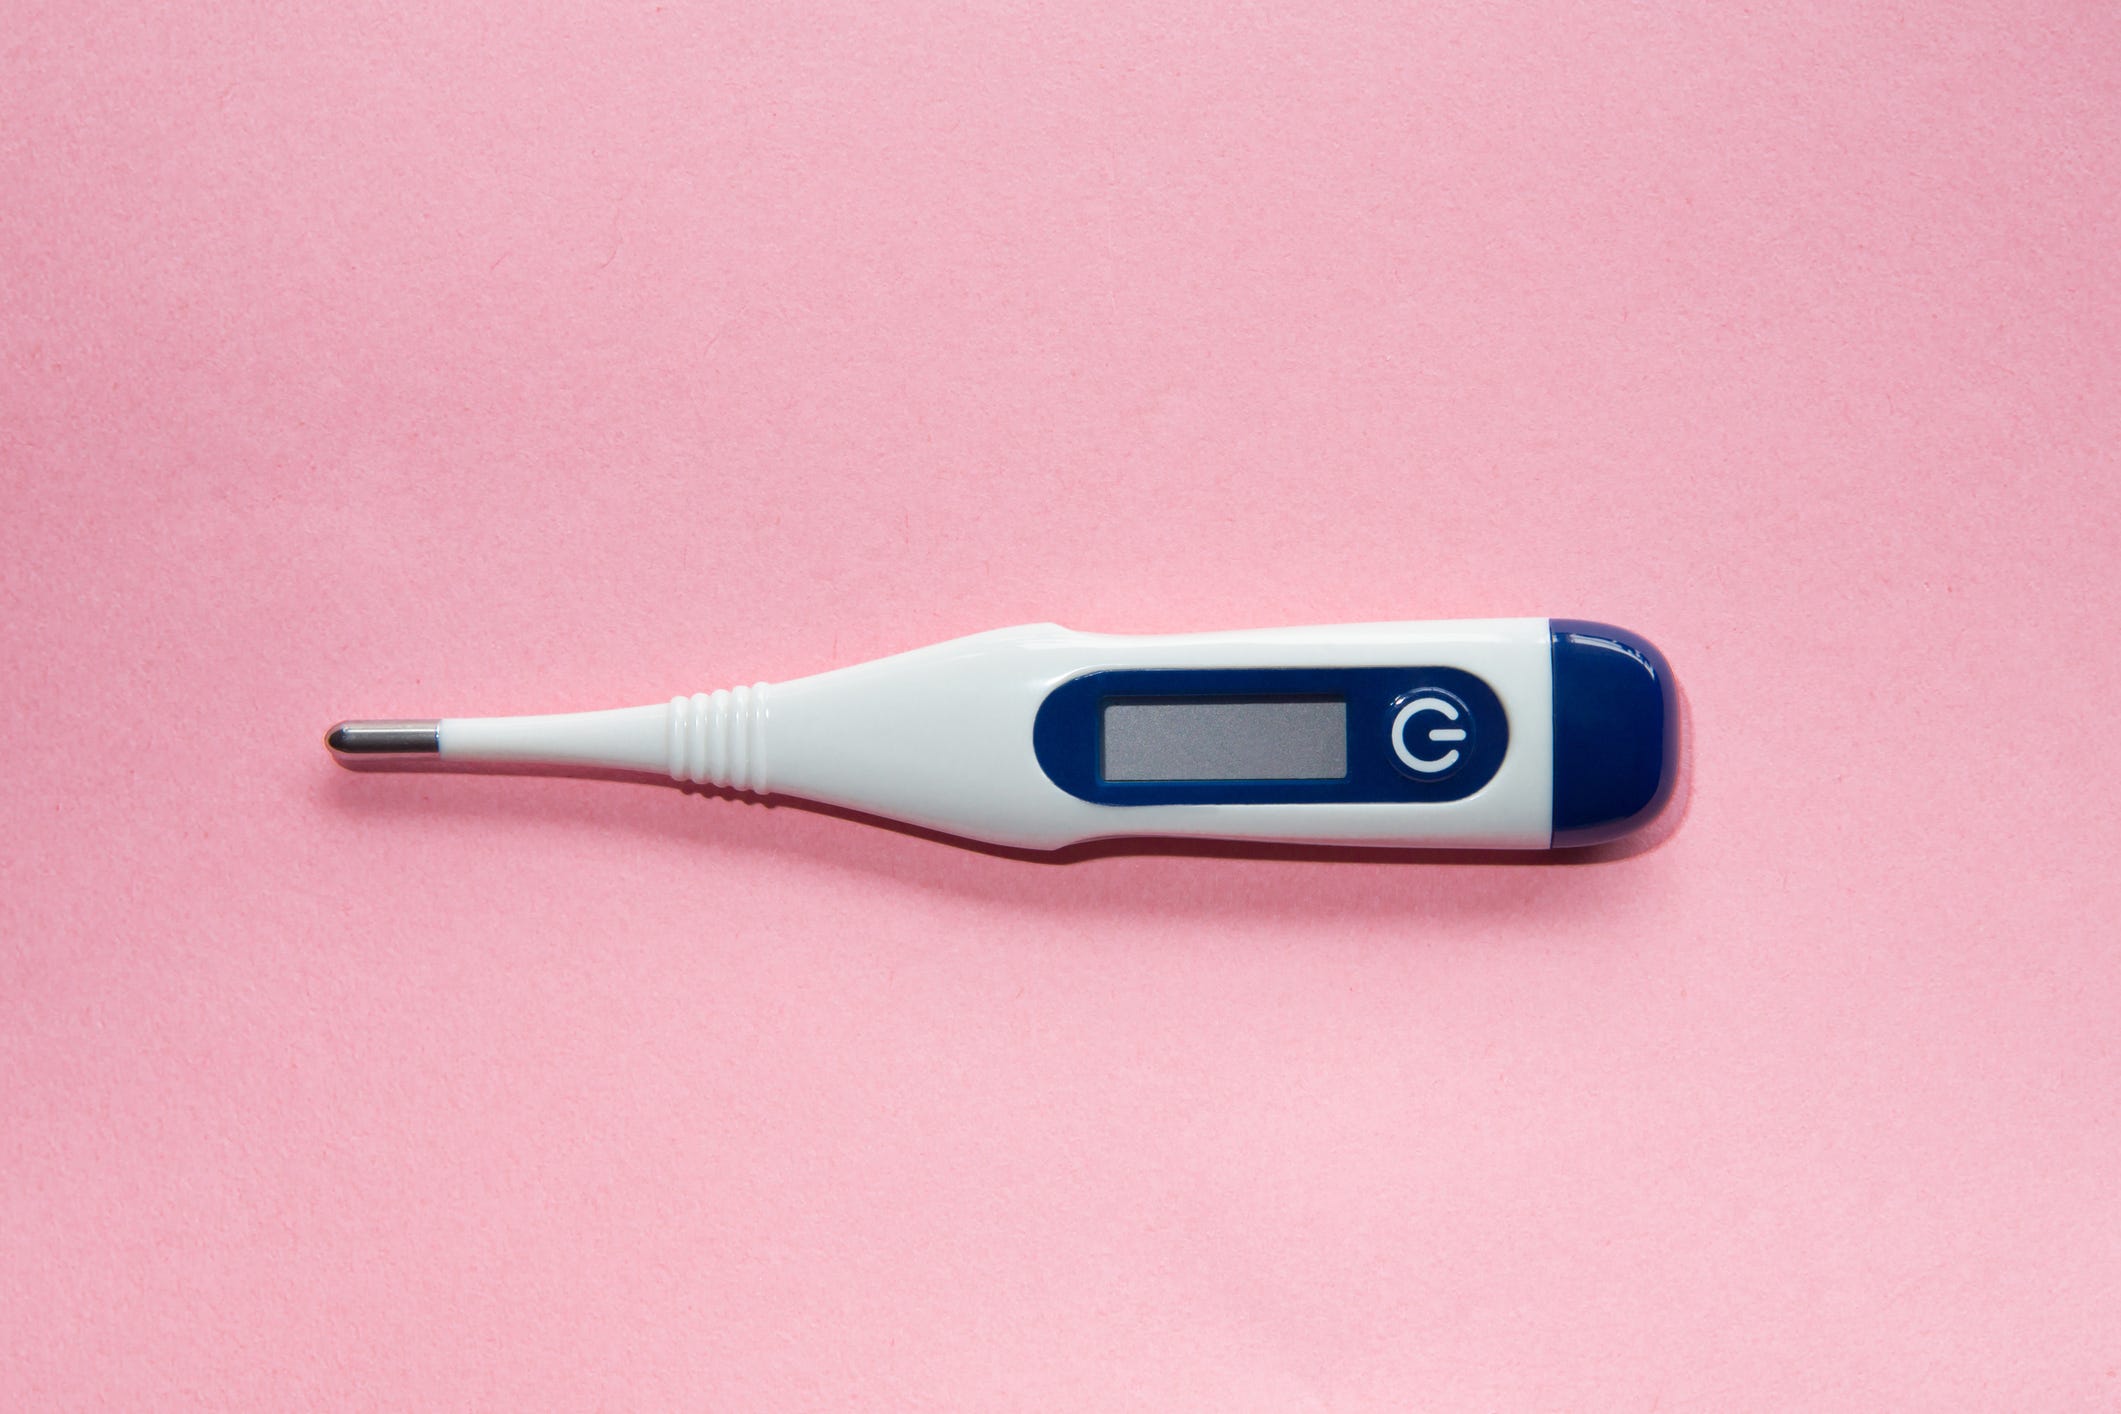 digital thermometer on pink background conceptual image for fertility, women's health and wellness